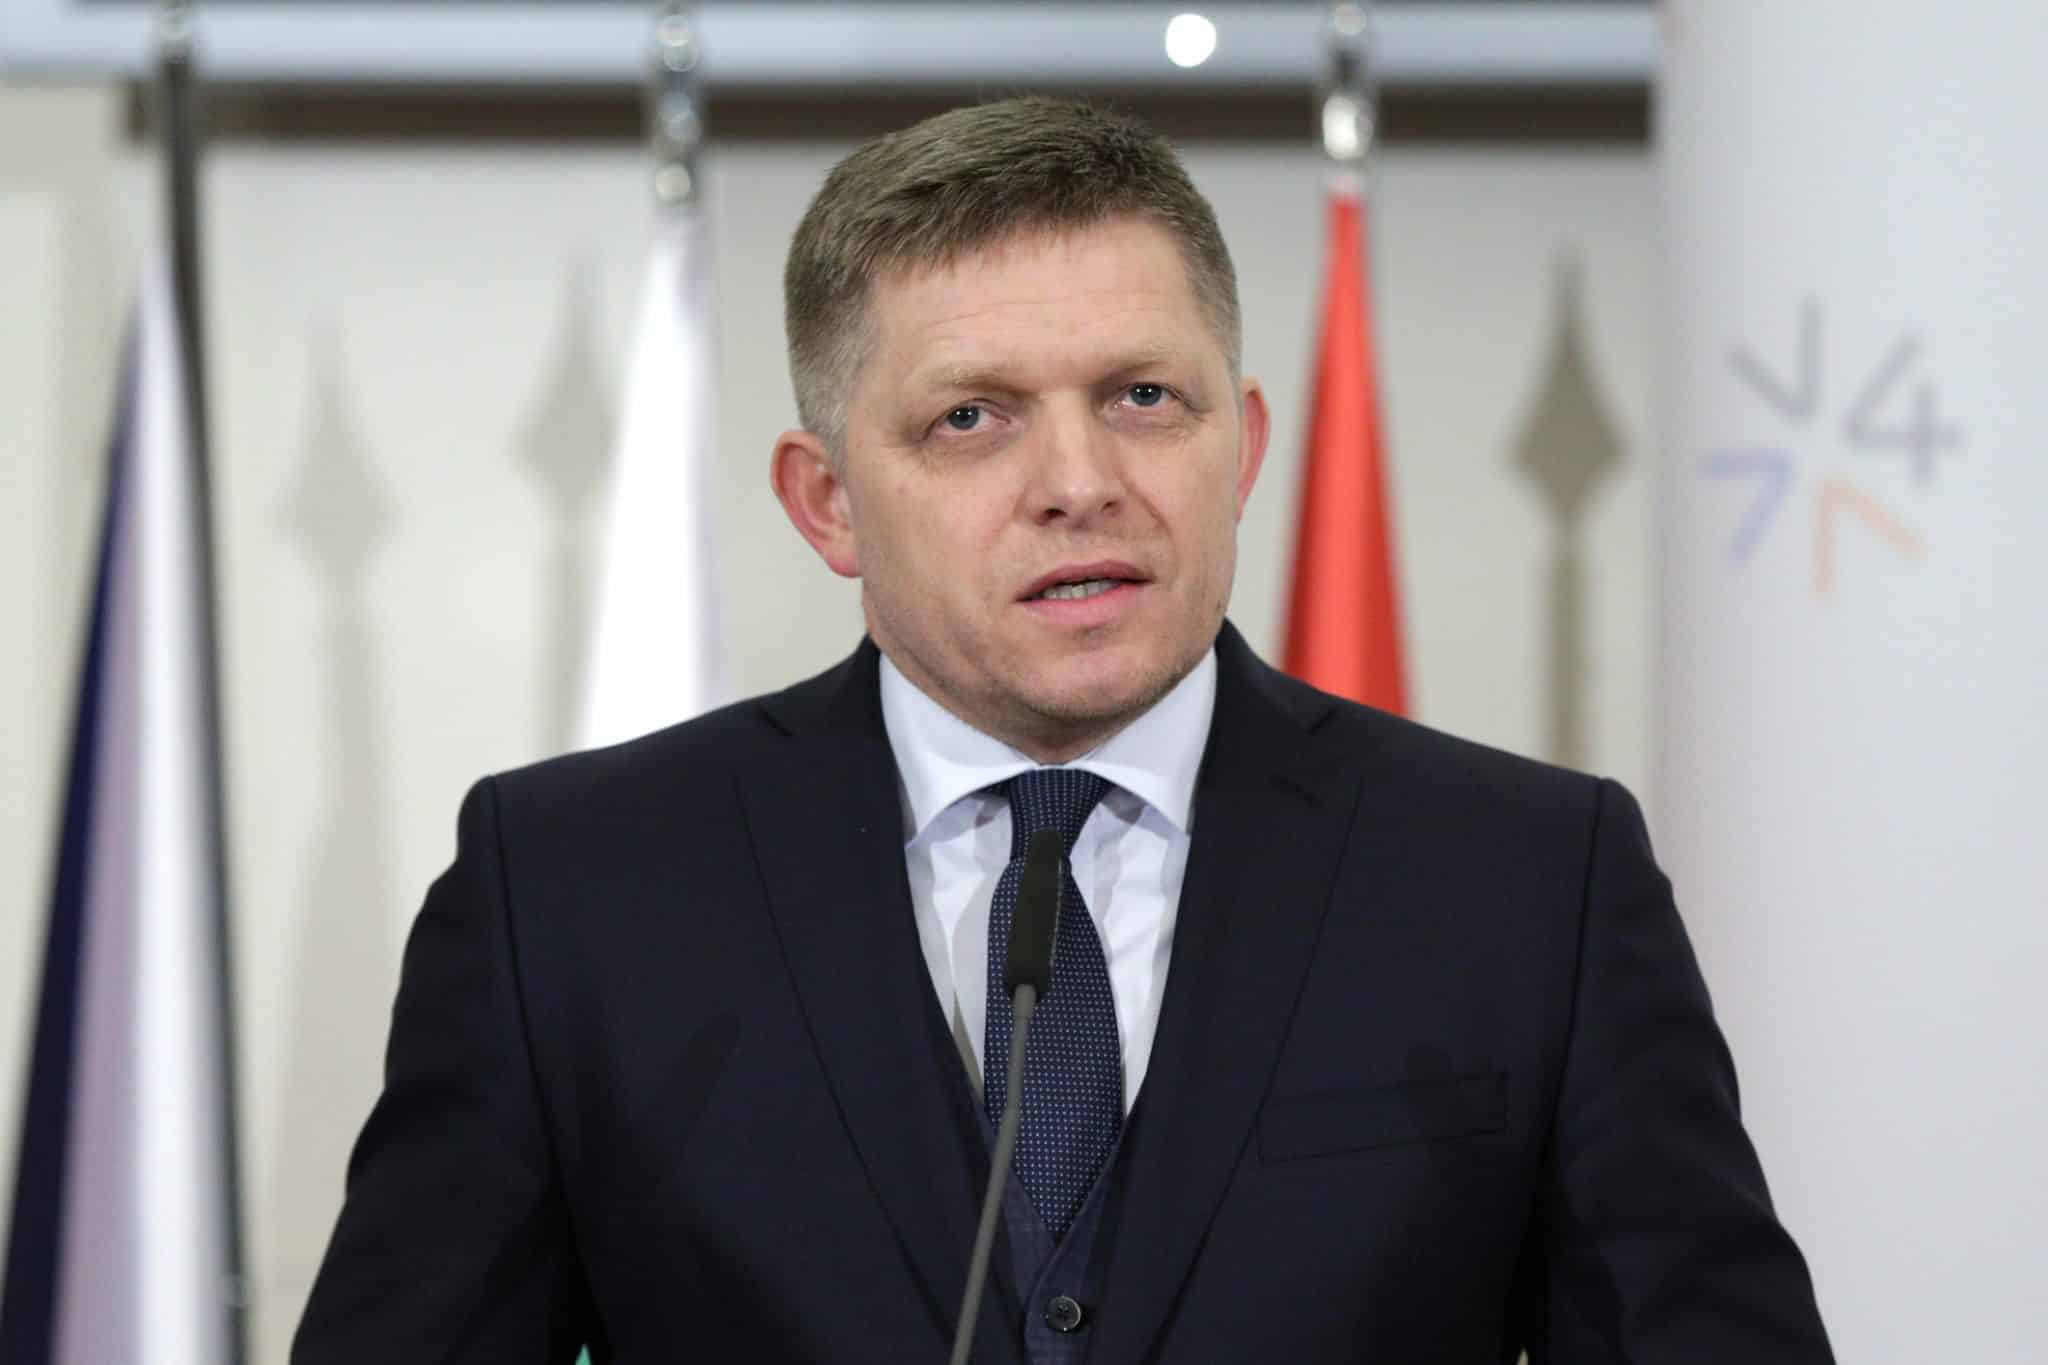 Slovakia’s Prime Minister Robert Fico now in ‘life-threatening’ condition after being shot multiple times